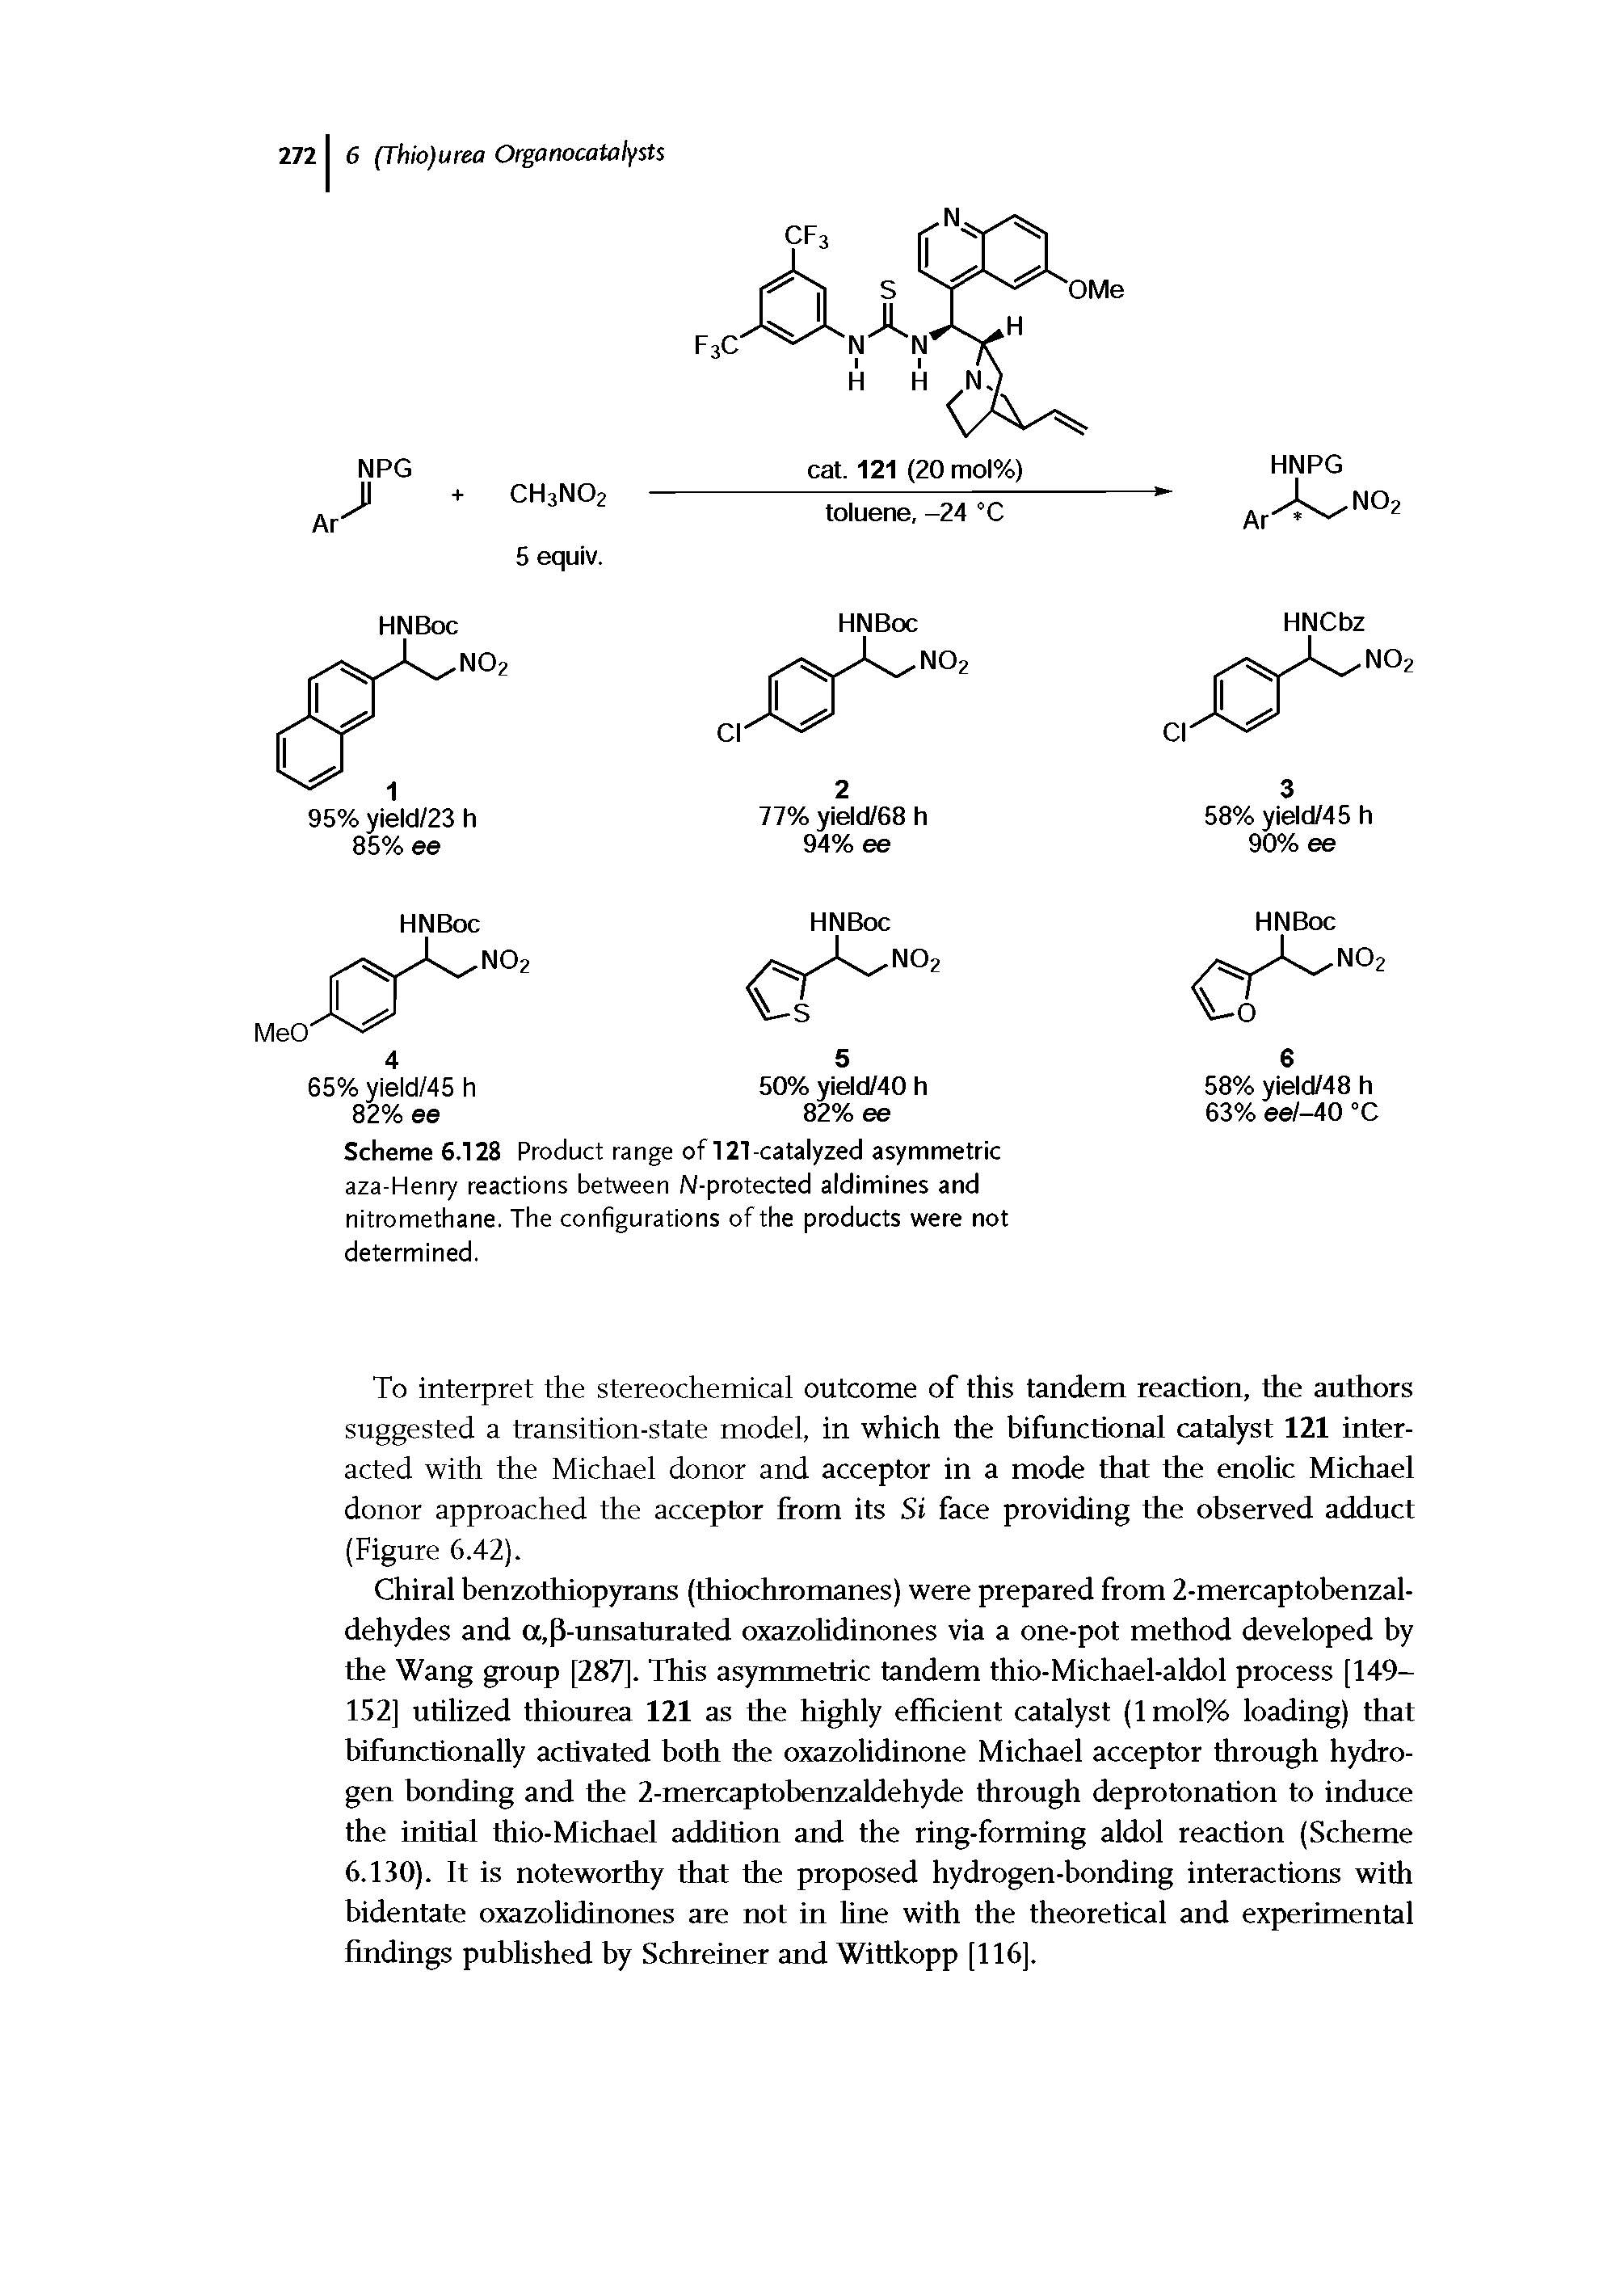 Scheme 6.128 Product range of 121-catalyzed asymmetric aza-Henry reactions between N-protected aldimines and nitromethane. The configurations of the products were not determined.